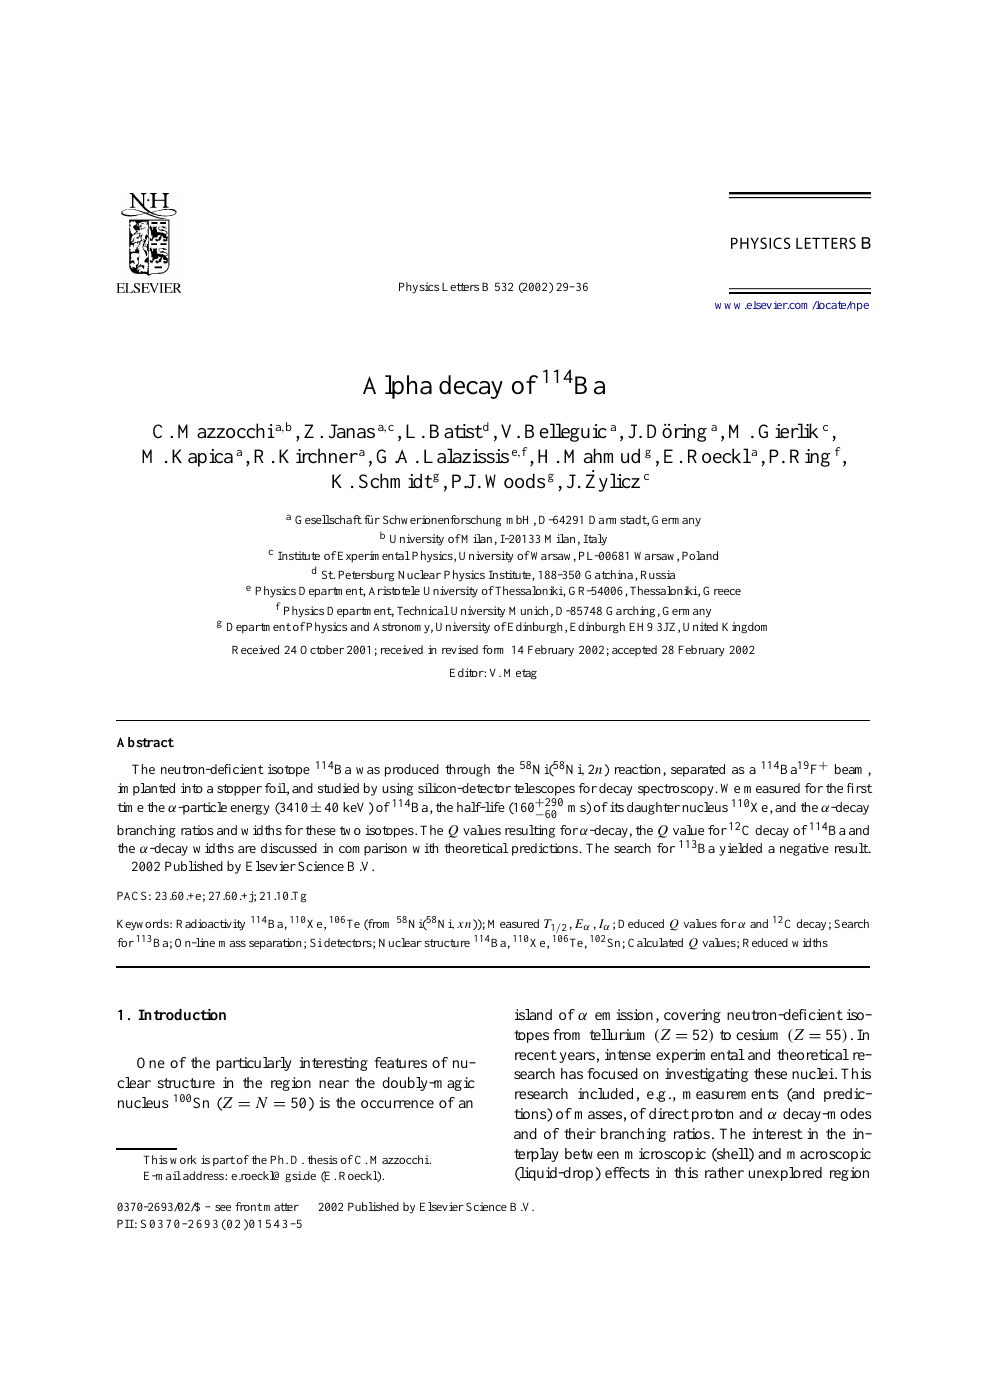 Alpha Decay Of 114ba Topic Of Research Paper In Physical Sciences Download Scholarly Article Pdf And Read For Free On Cyberleninka Open Science Hub